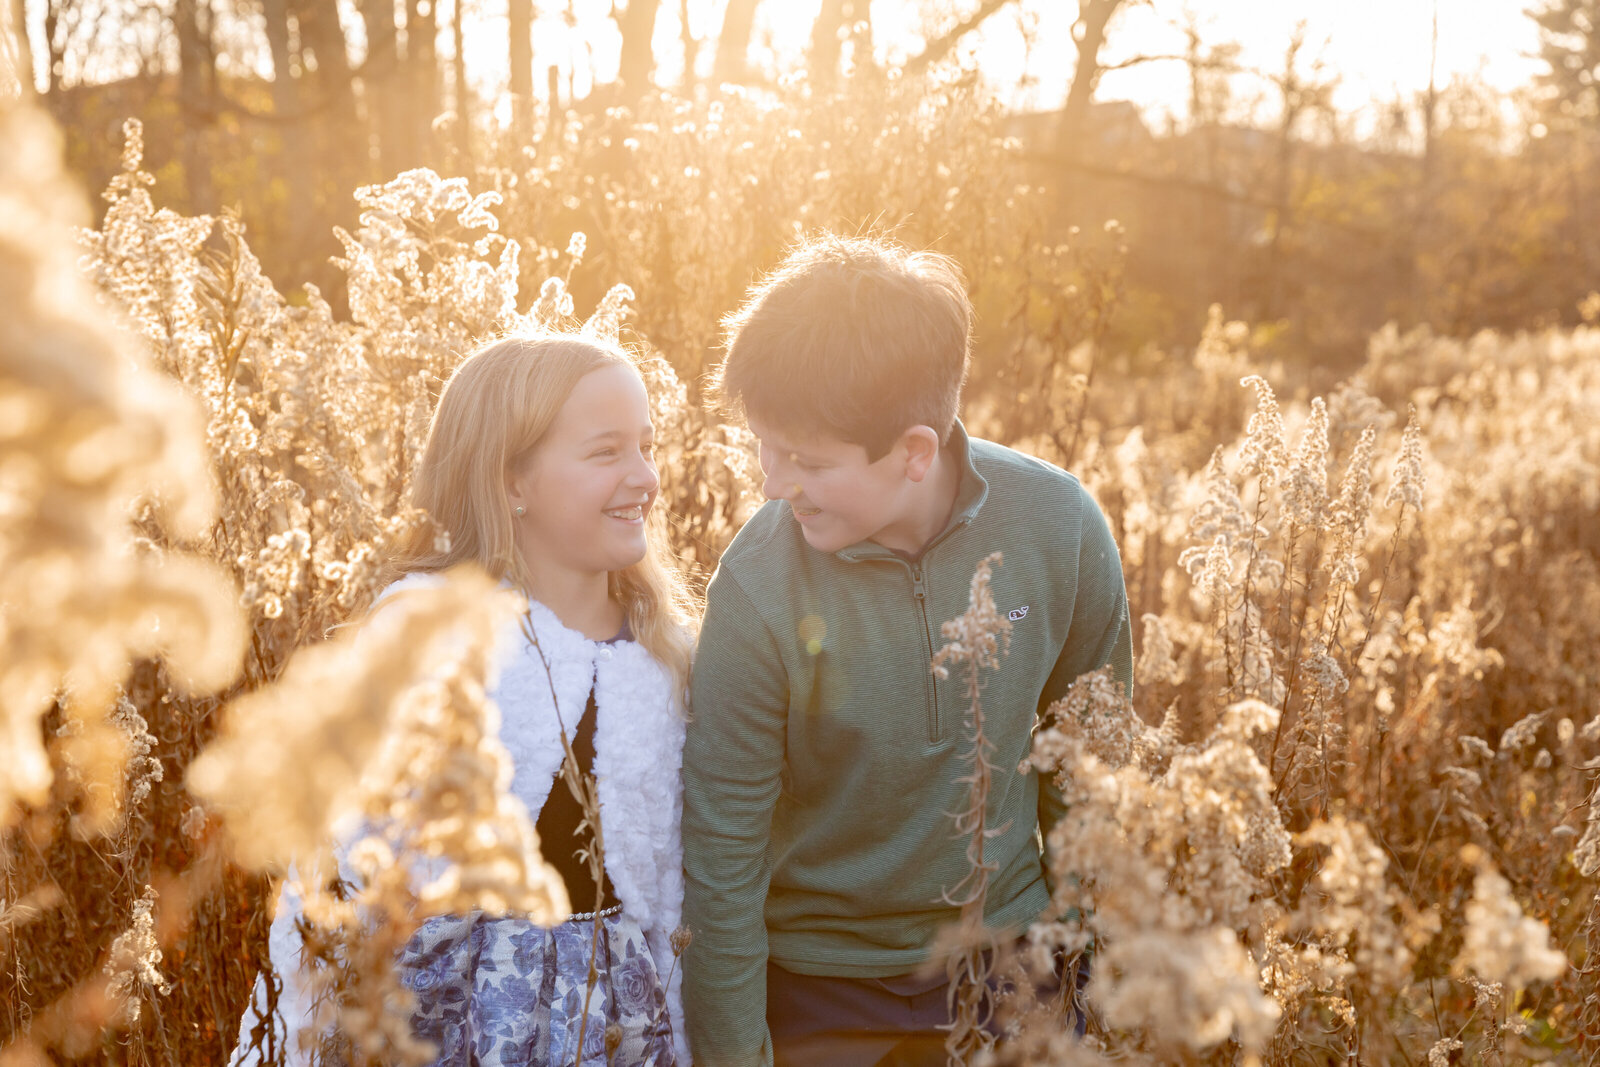 brother and sister stand in field of tall grass during golden hour while looking at each other smiling and laughing